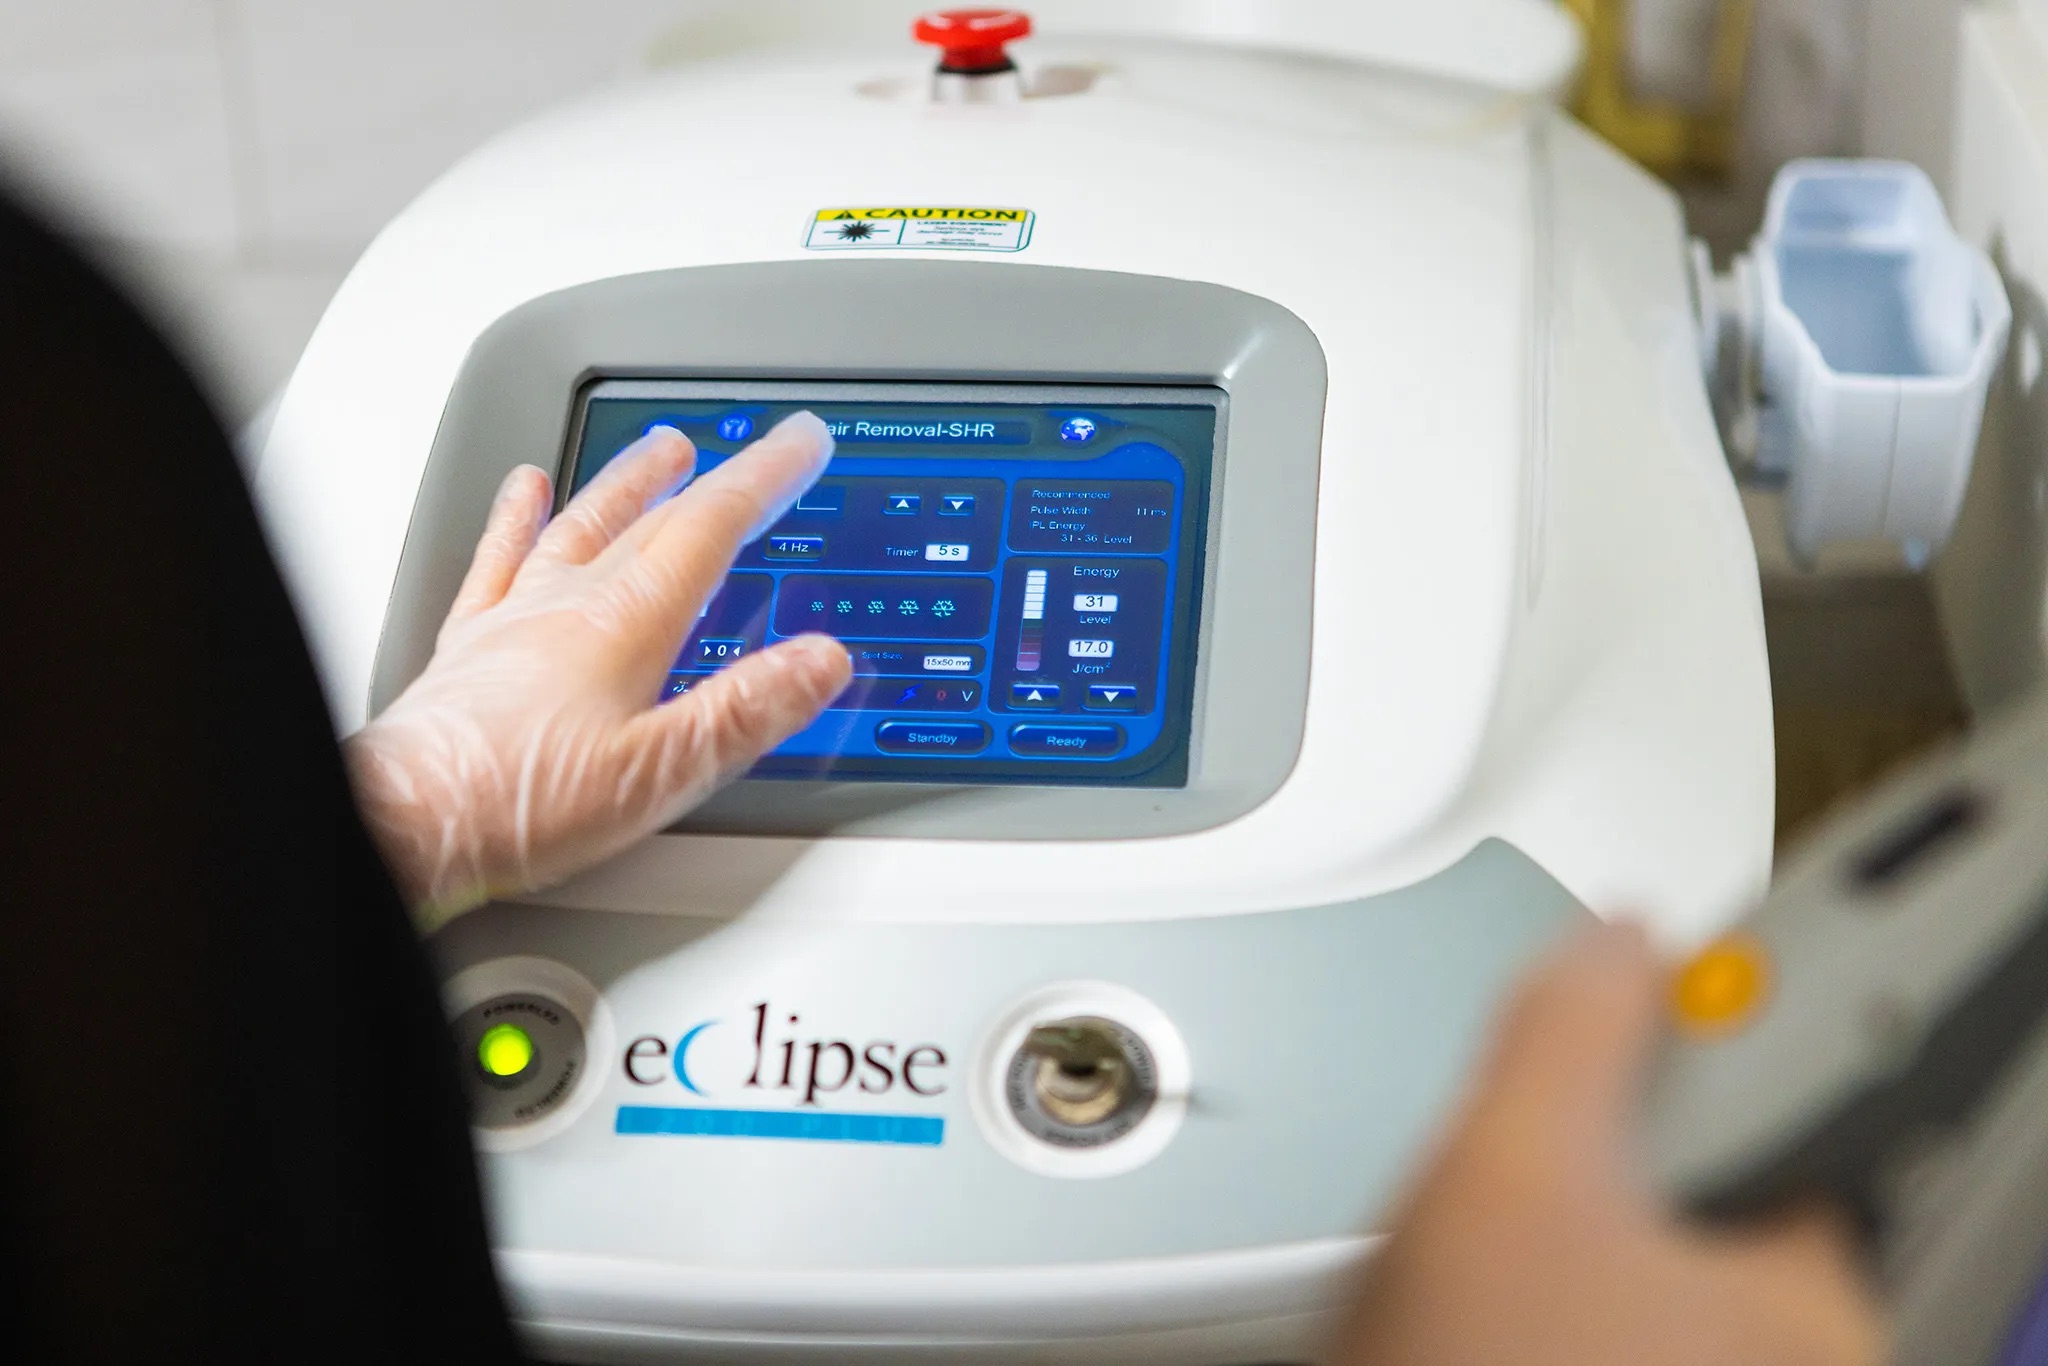 Hair removal equipment Eclipse at Le Plaisir beauty clinic, Canterbury, New Zealand